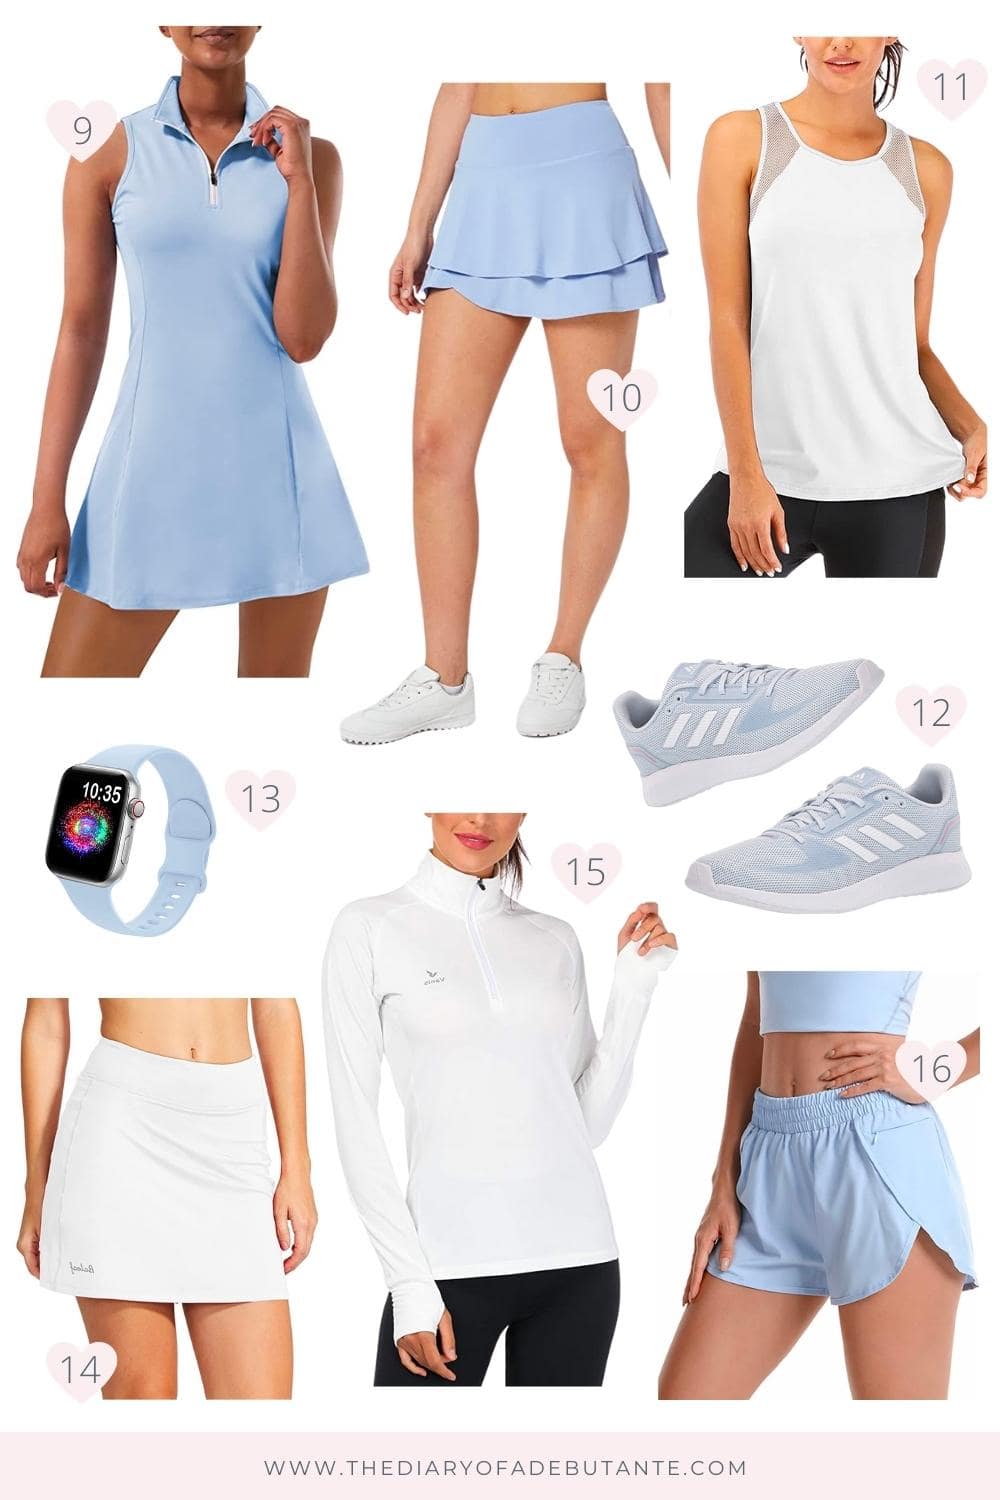 Affordable fashion blogger Stephanie Ziajka rounds up some cute tennis skirts and womens tennis outfits on Diary of a Debutante!